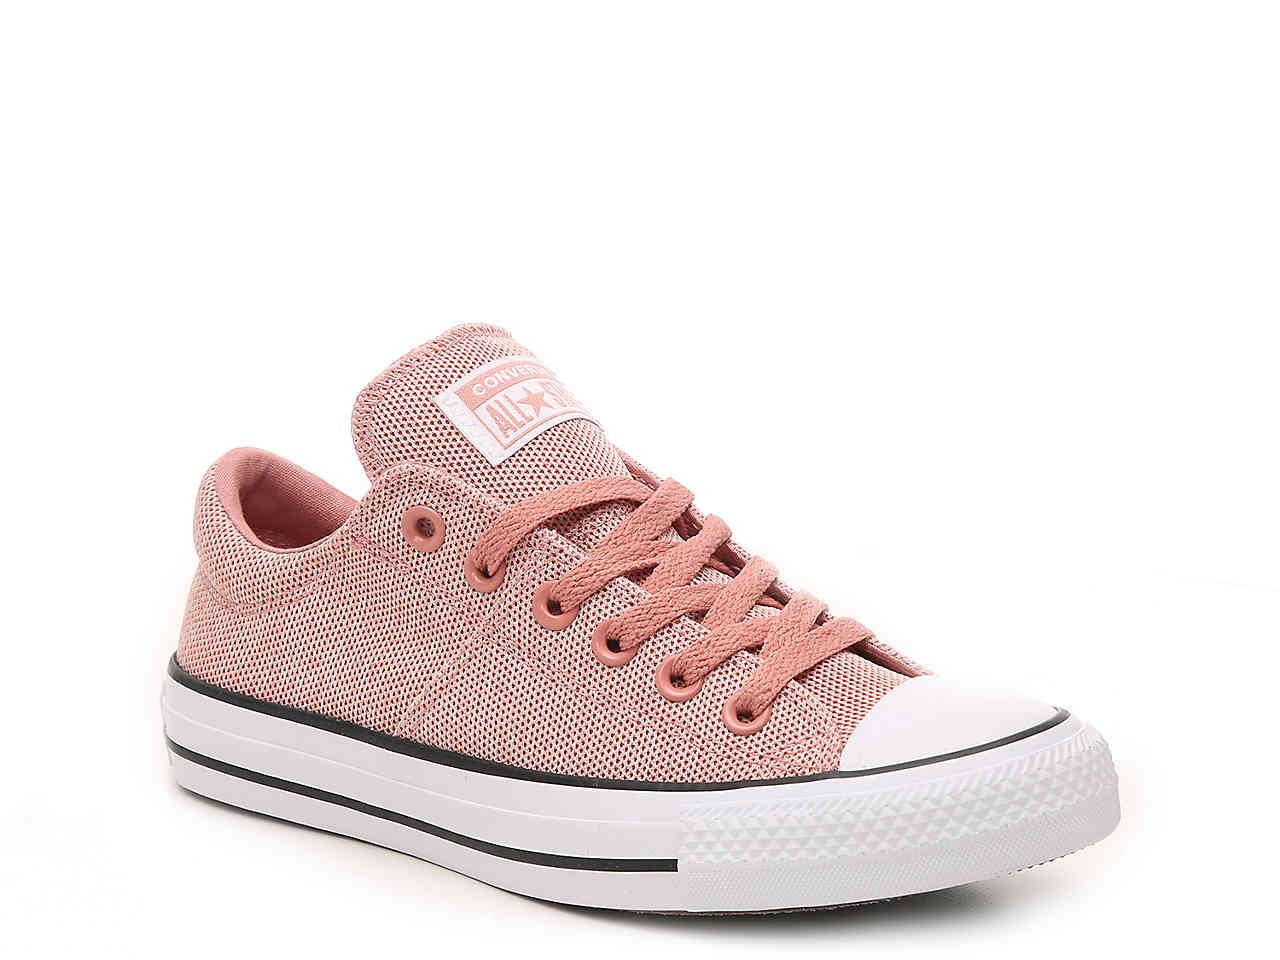 Converse Chuck Taylor All Star Madison Sneaker in Purple | Lyst